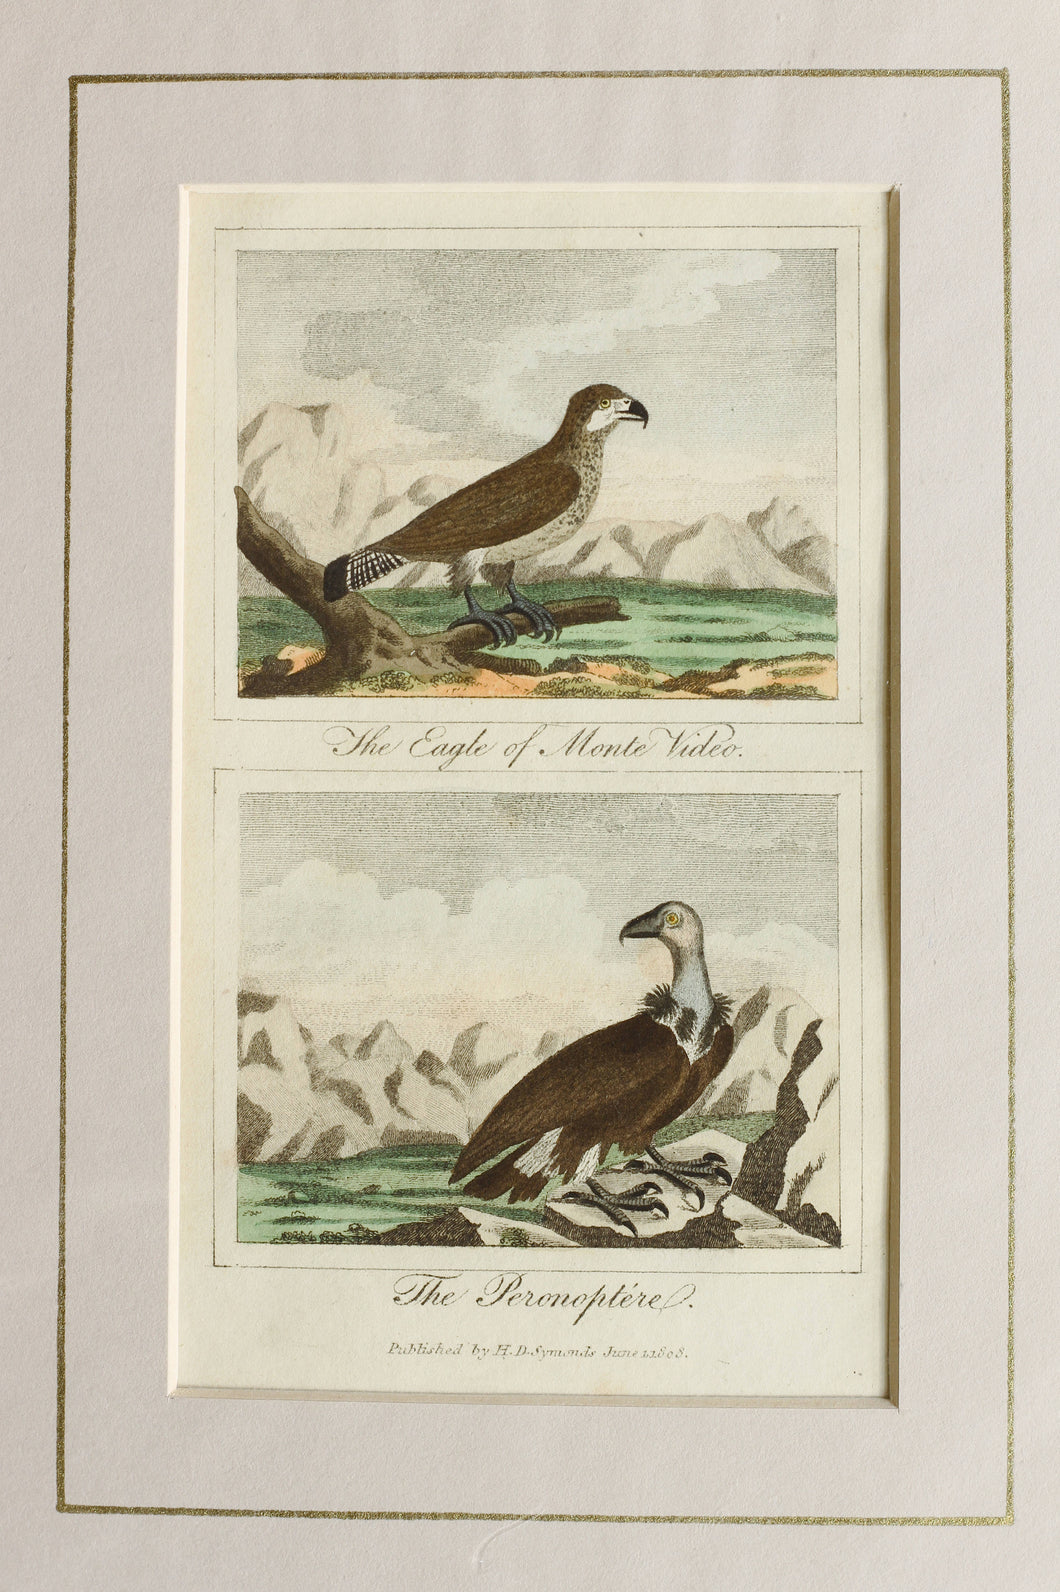 The Eagle of Monte Video and The Peronoptere - Antique Copper Engraving circa 1808